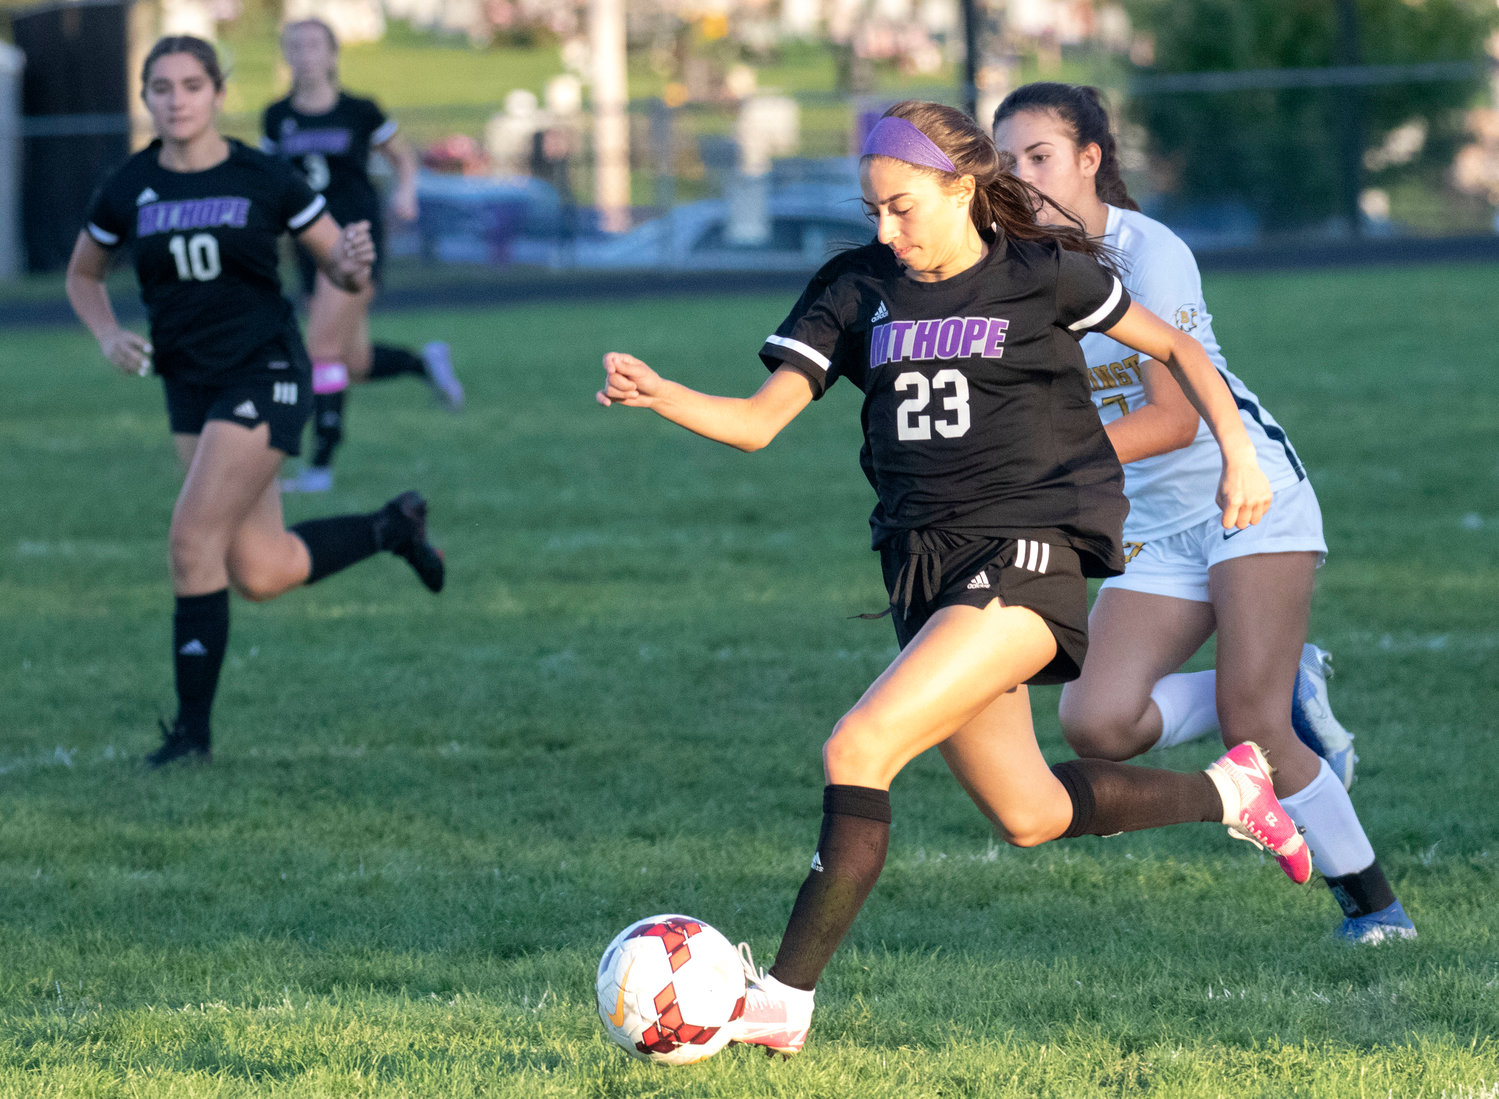 Junior midfielder Hannah Rezendes speeds up field with the ball and a defender in tow.